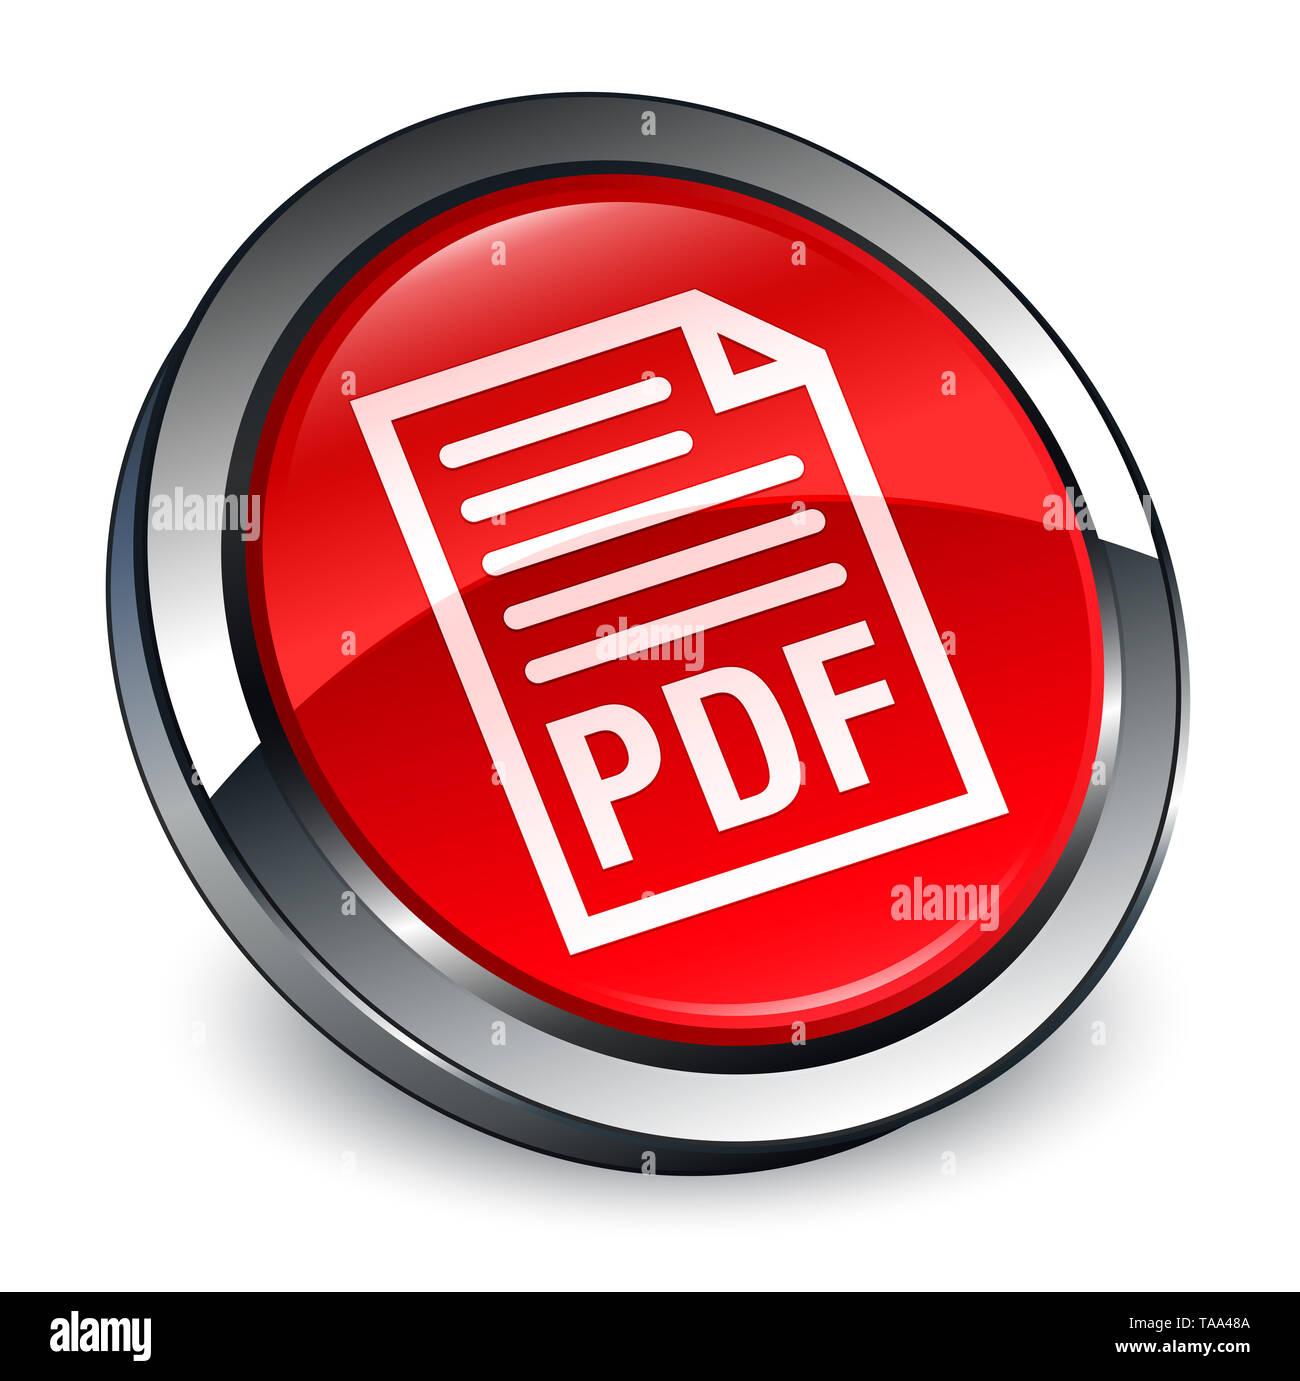 PDF document icon isolated on 3d red round button abstract illustration Stock Photo